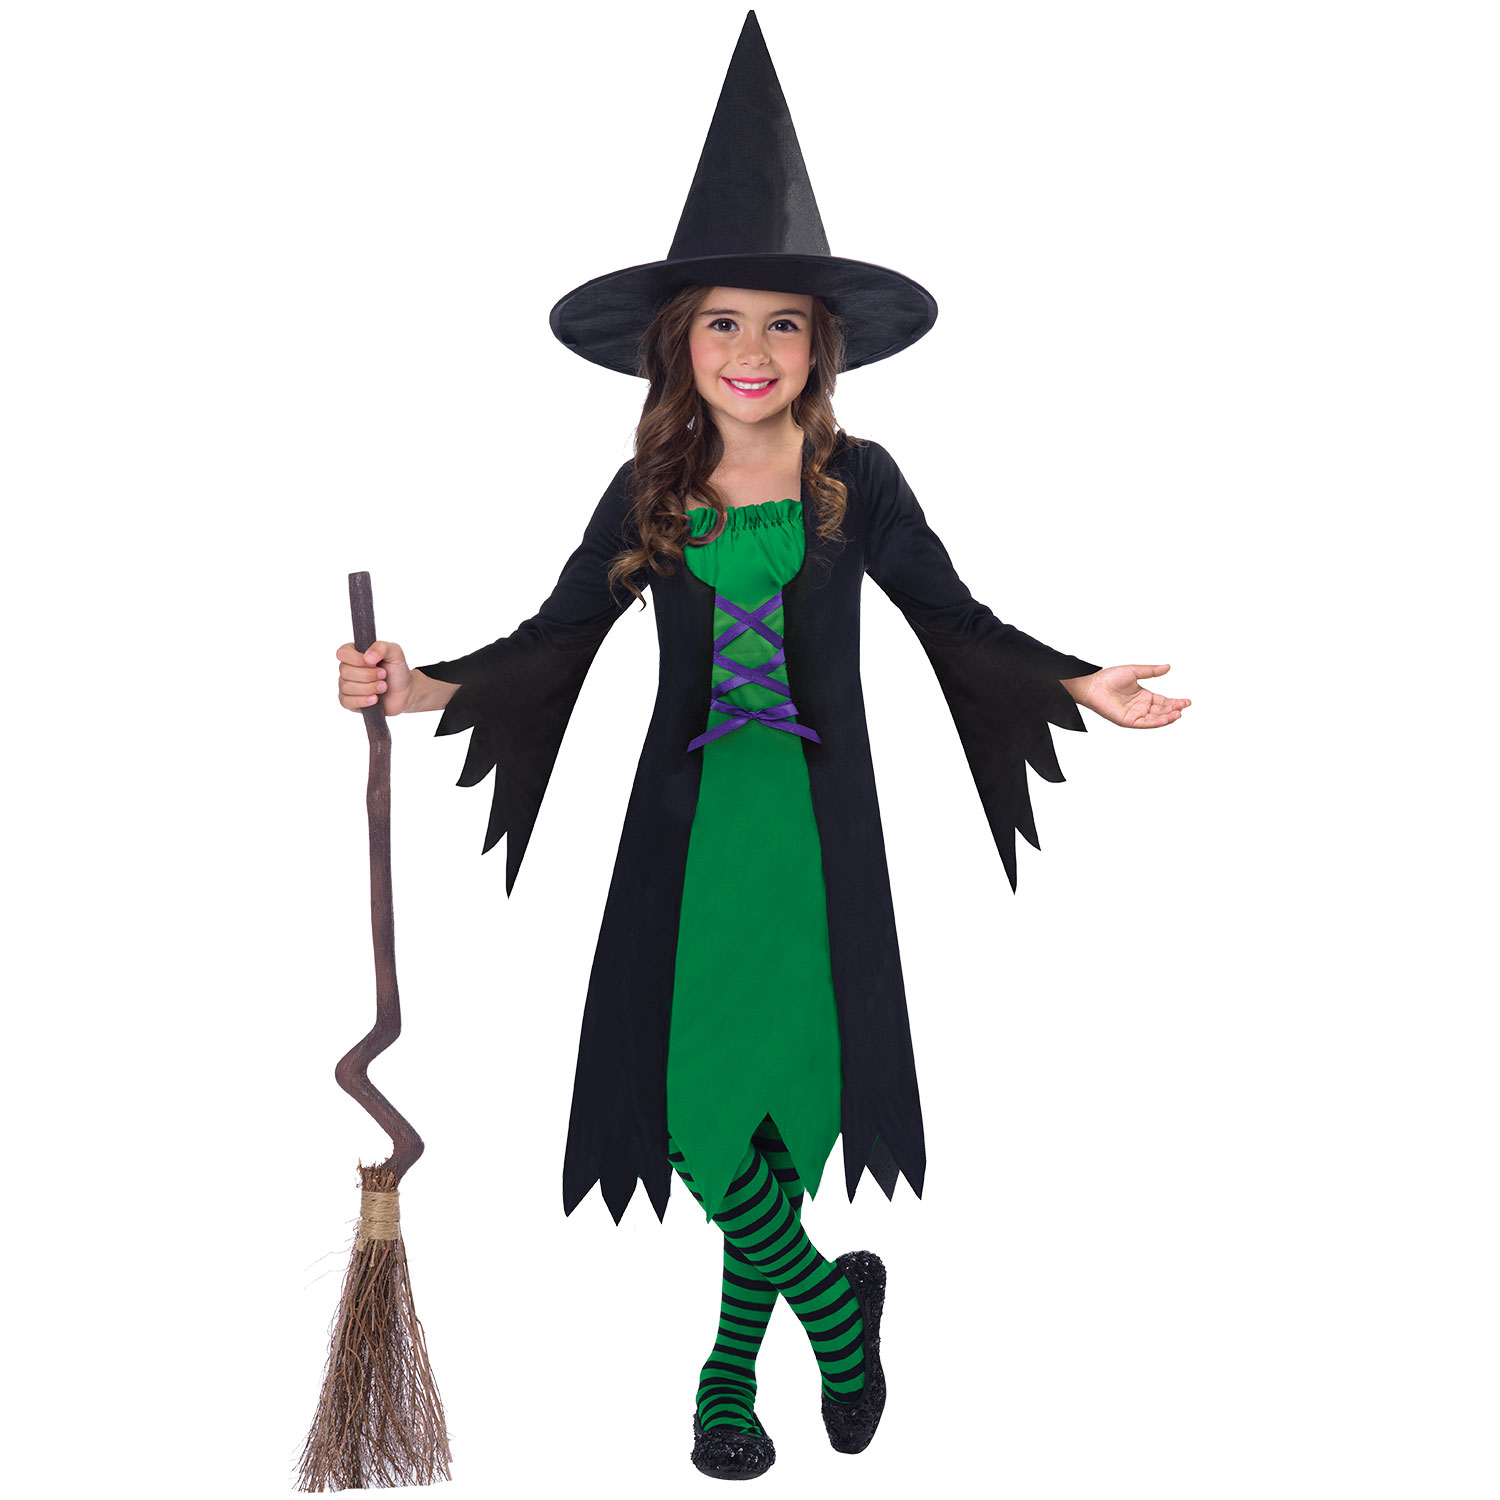 Wicked Witch Costume - Age 6-8 Years- 1 PC : Amscan International